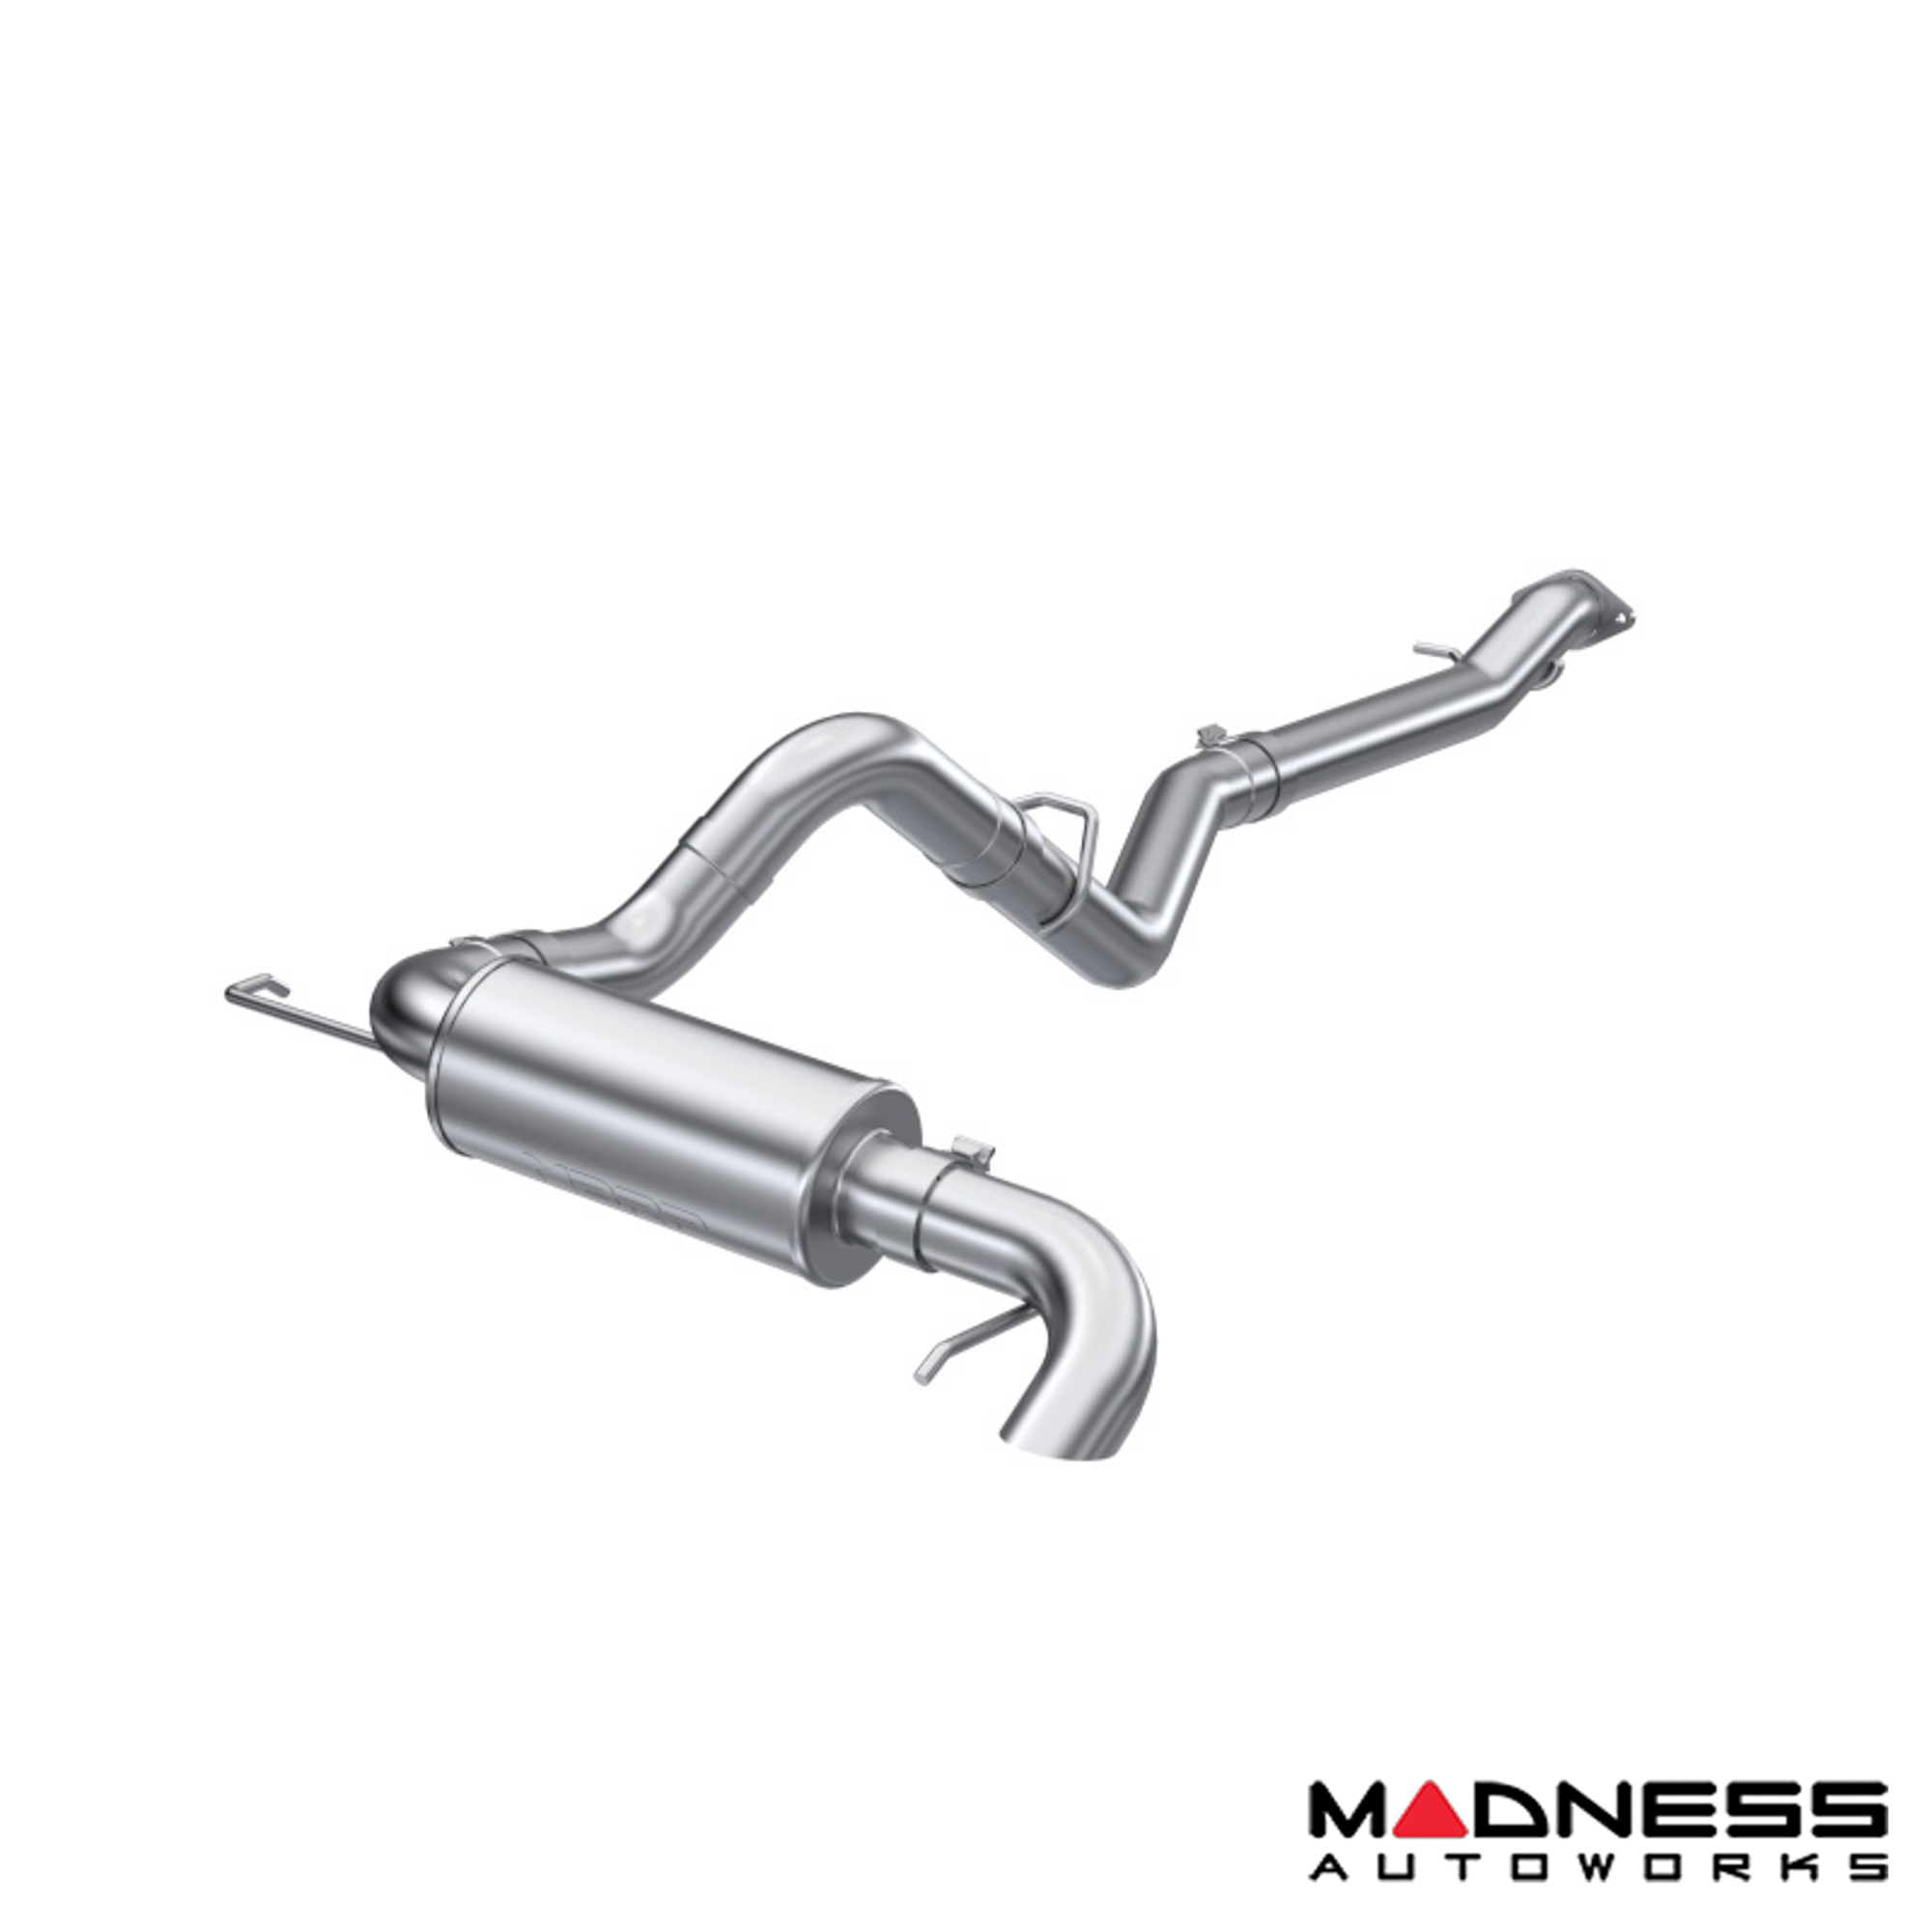 Ford Bronco Performance Exhaust System - Cat Back - MBRP - Aluminized Steel - 3"